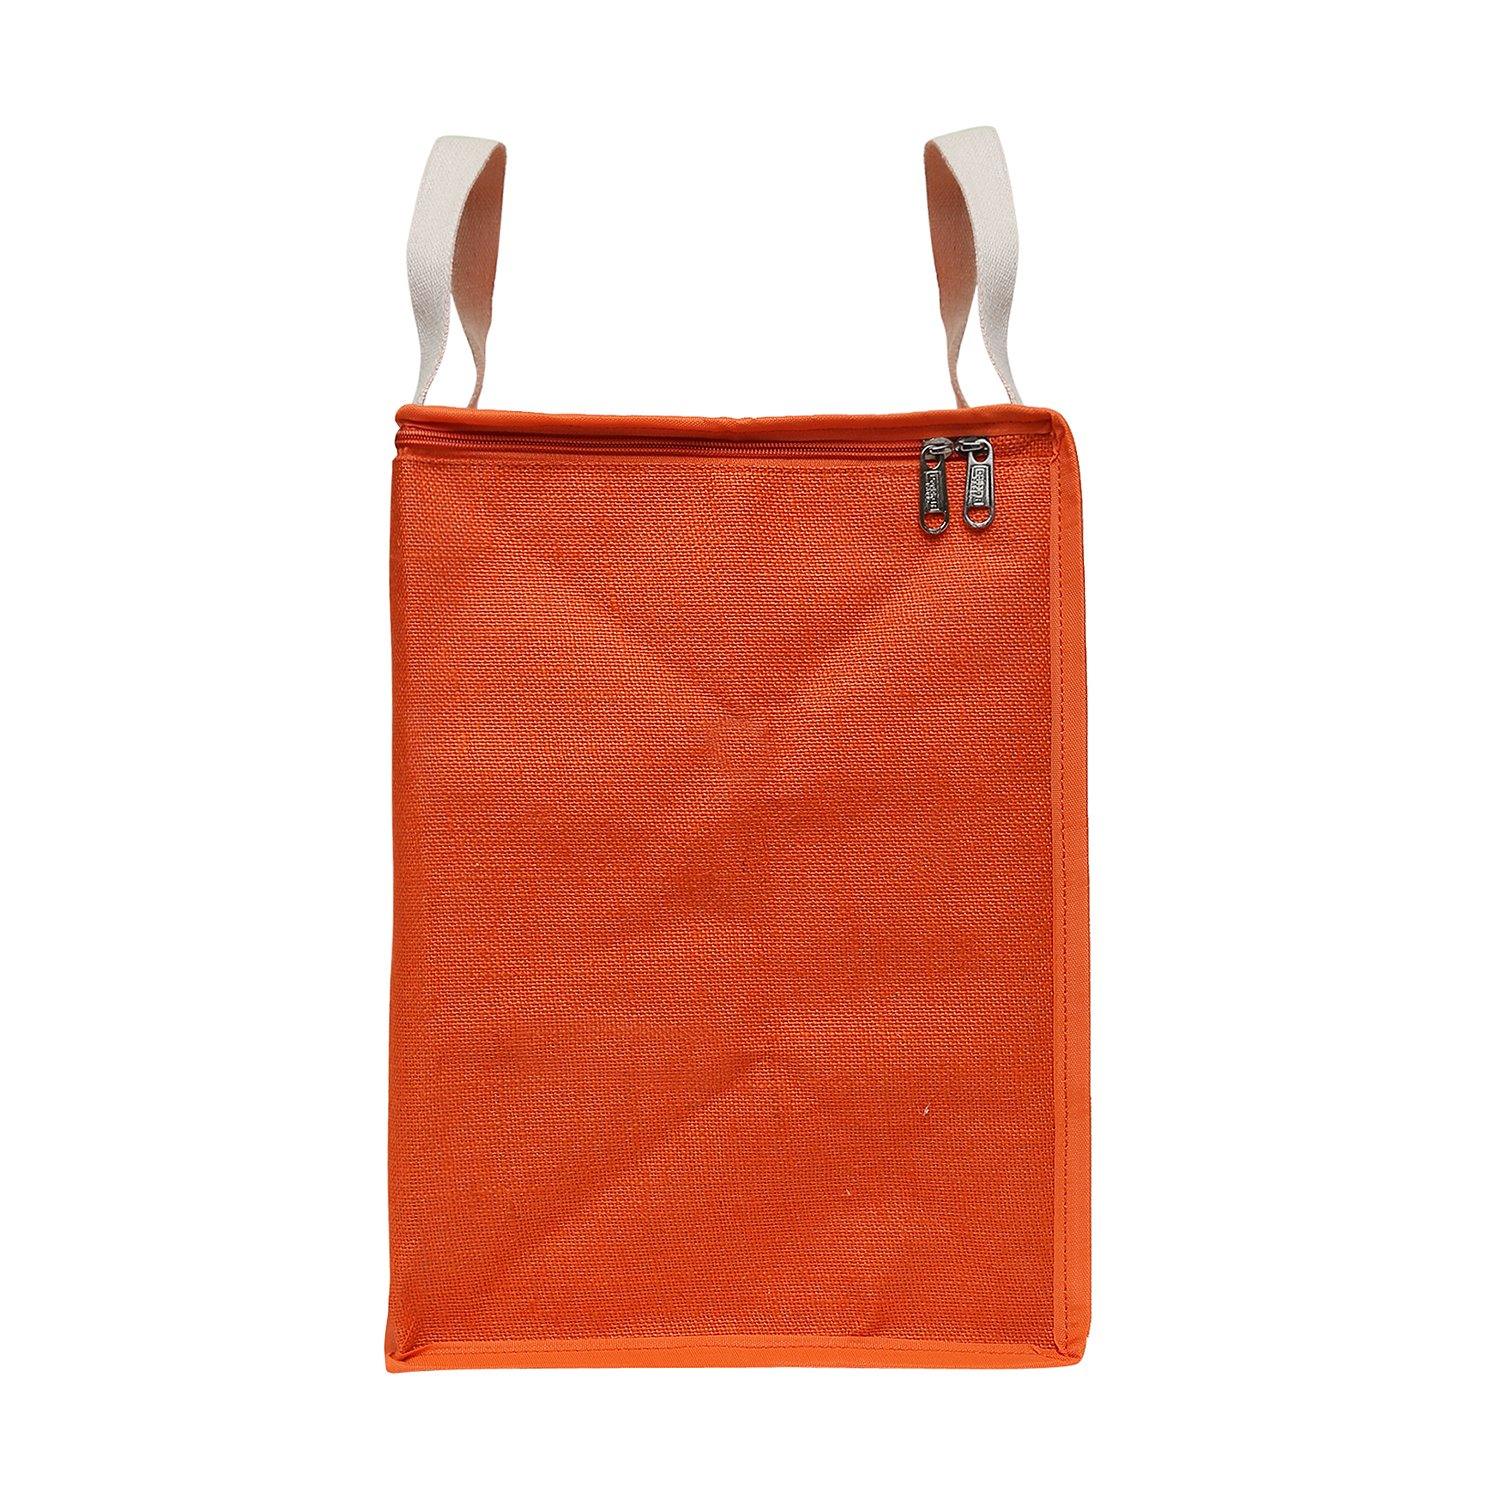 DOUBLE R BAGS Jute Shopping bags with Dual Zippers (Orange) - Double R Bags